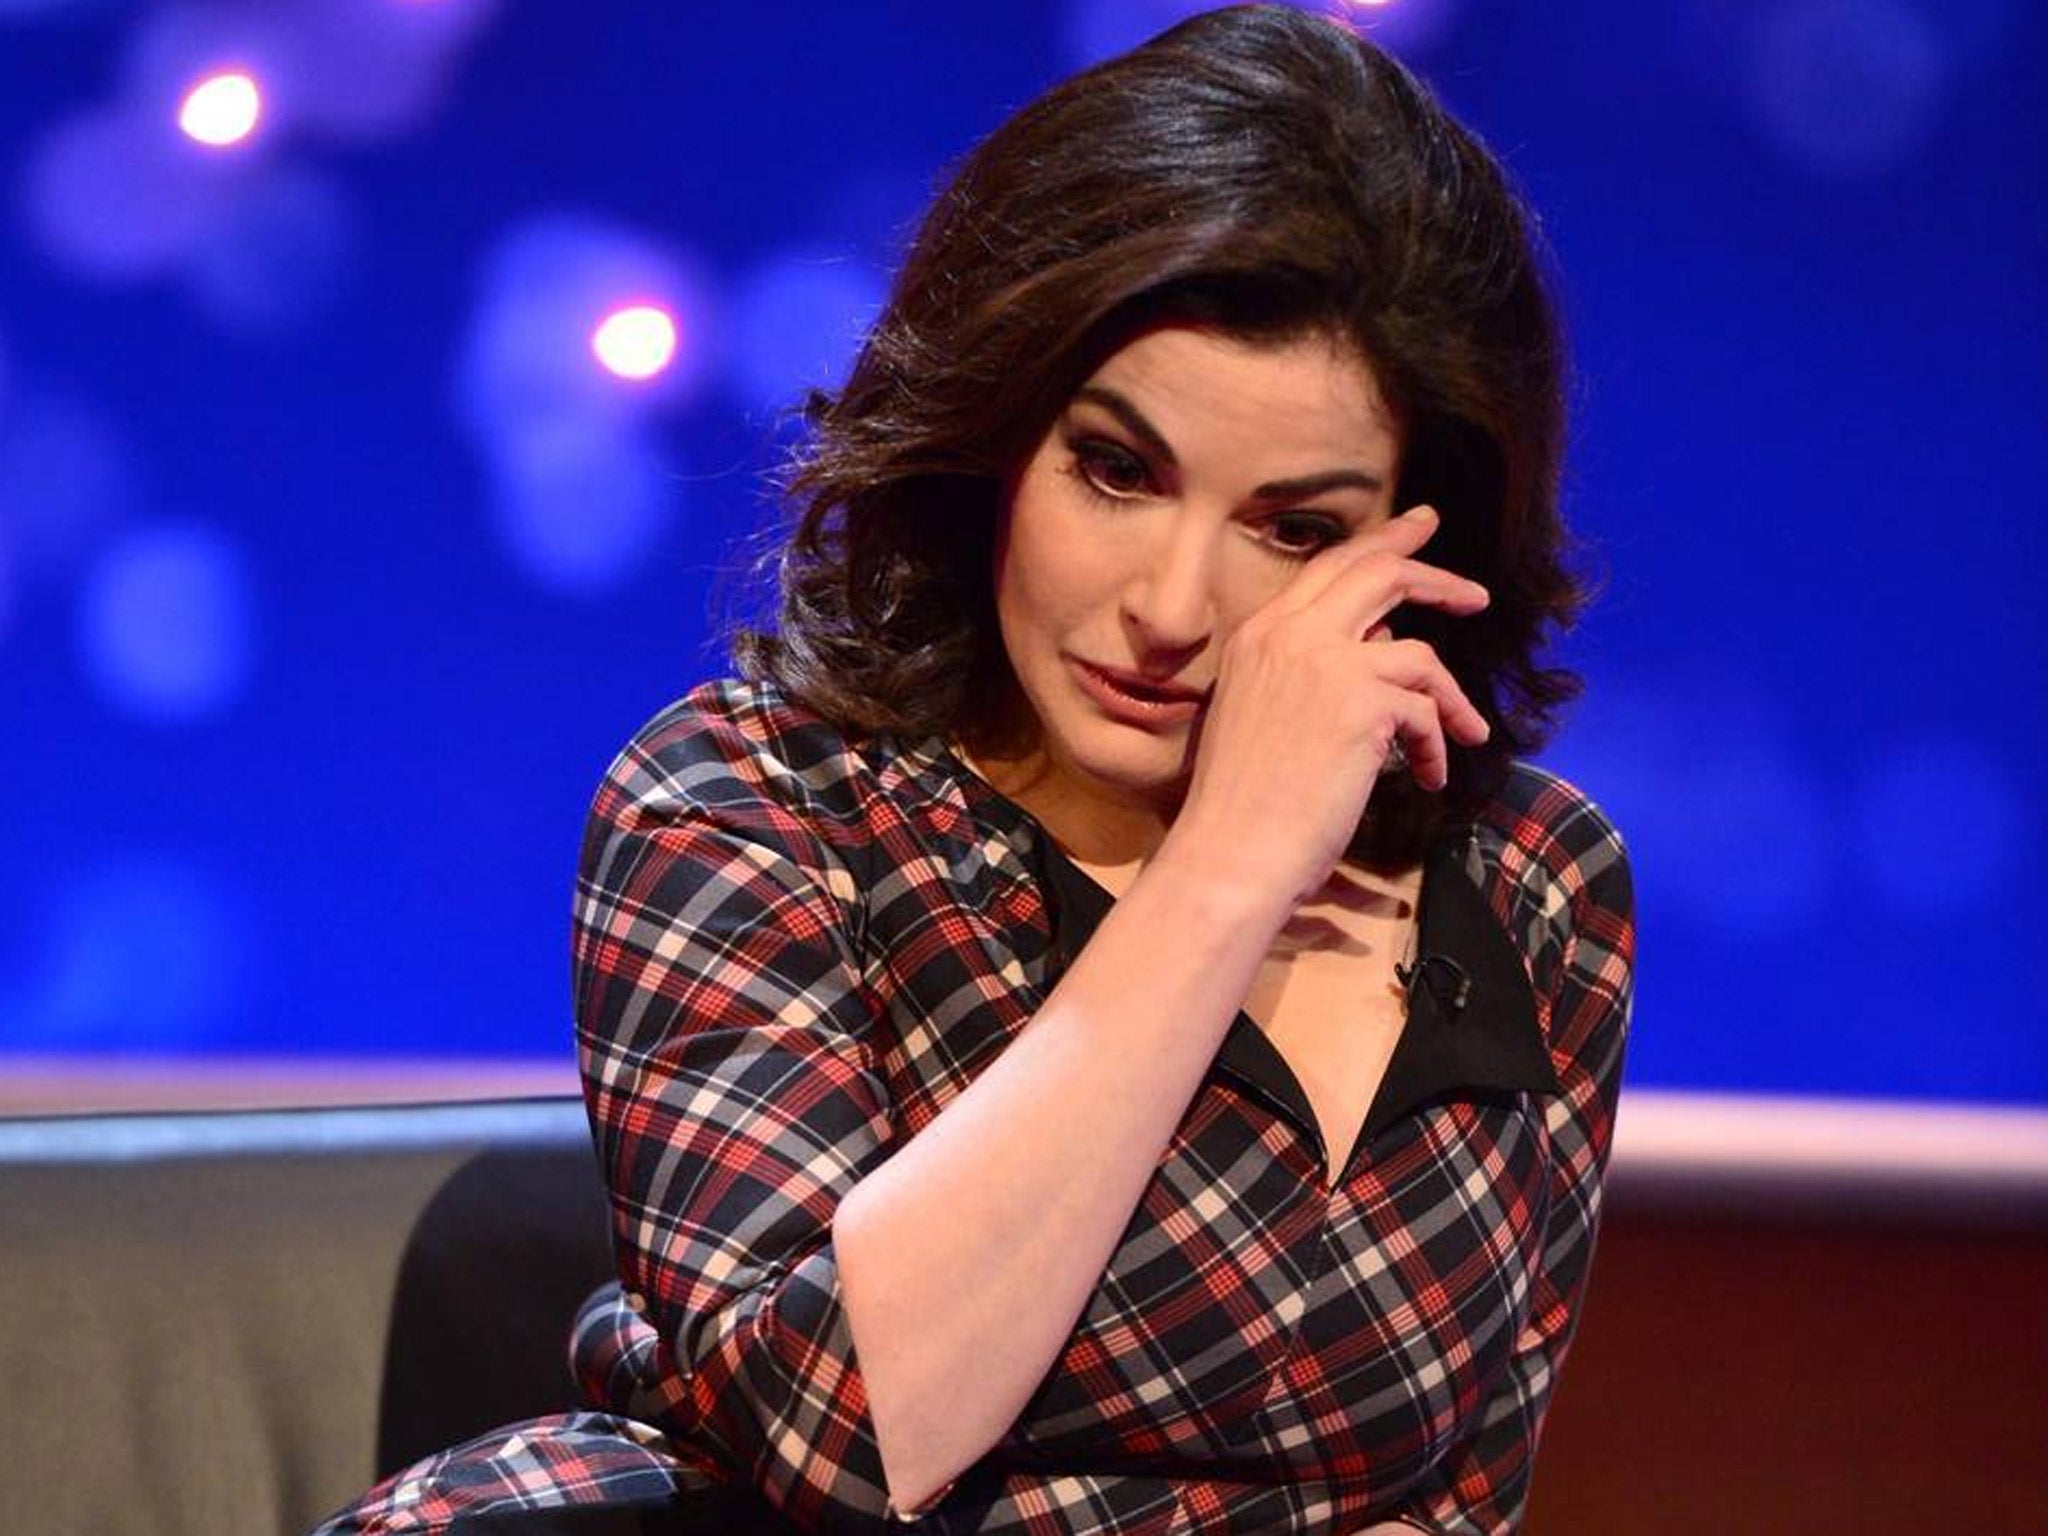 Nigella Lawson appearing on 'The Michael McIntyre Chat Show' which was aired earlier this week